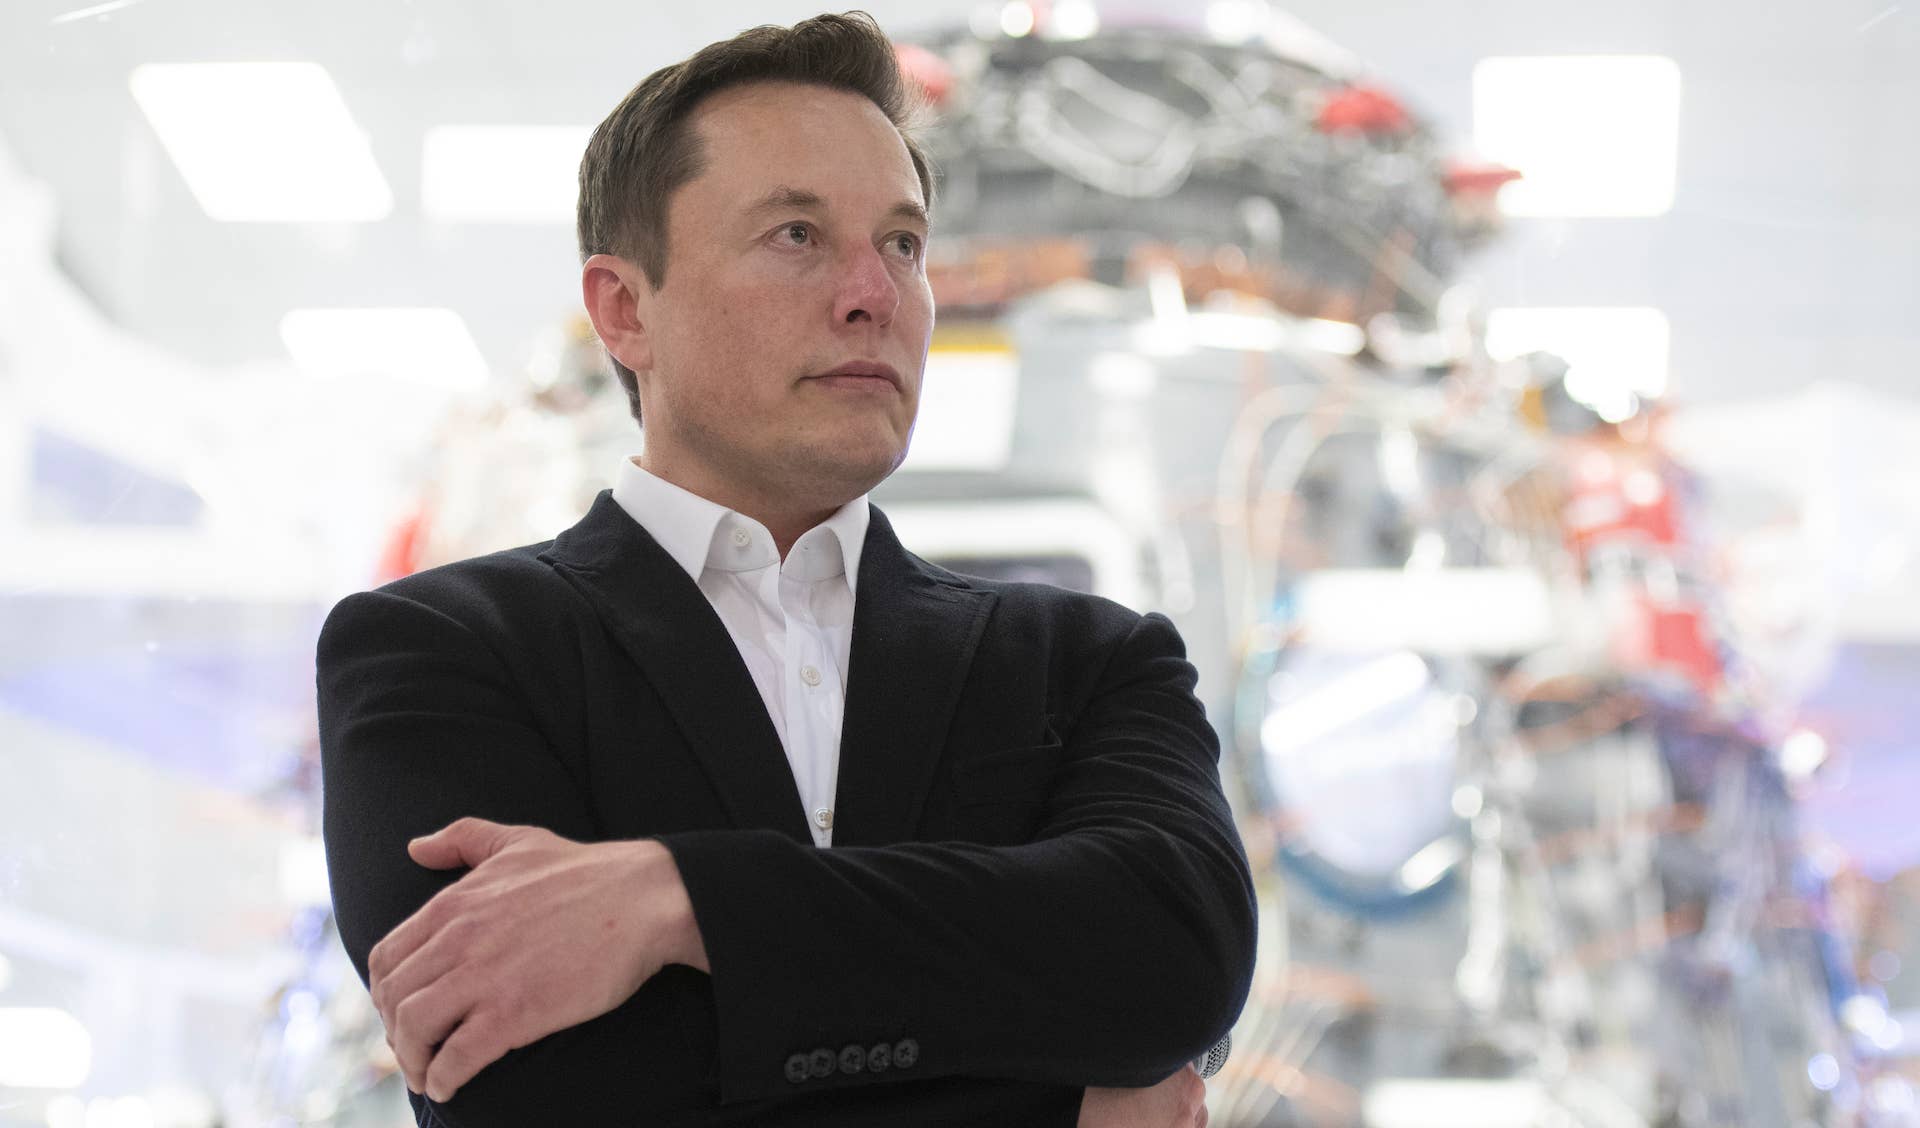 Elon Musk standing with arms crossed